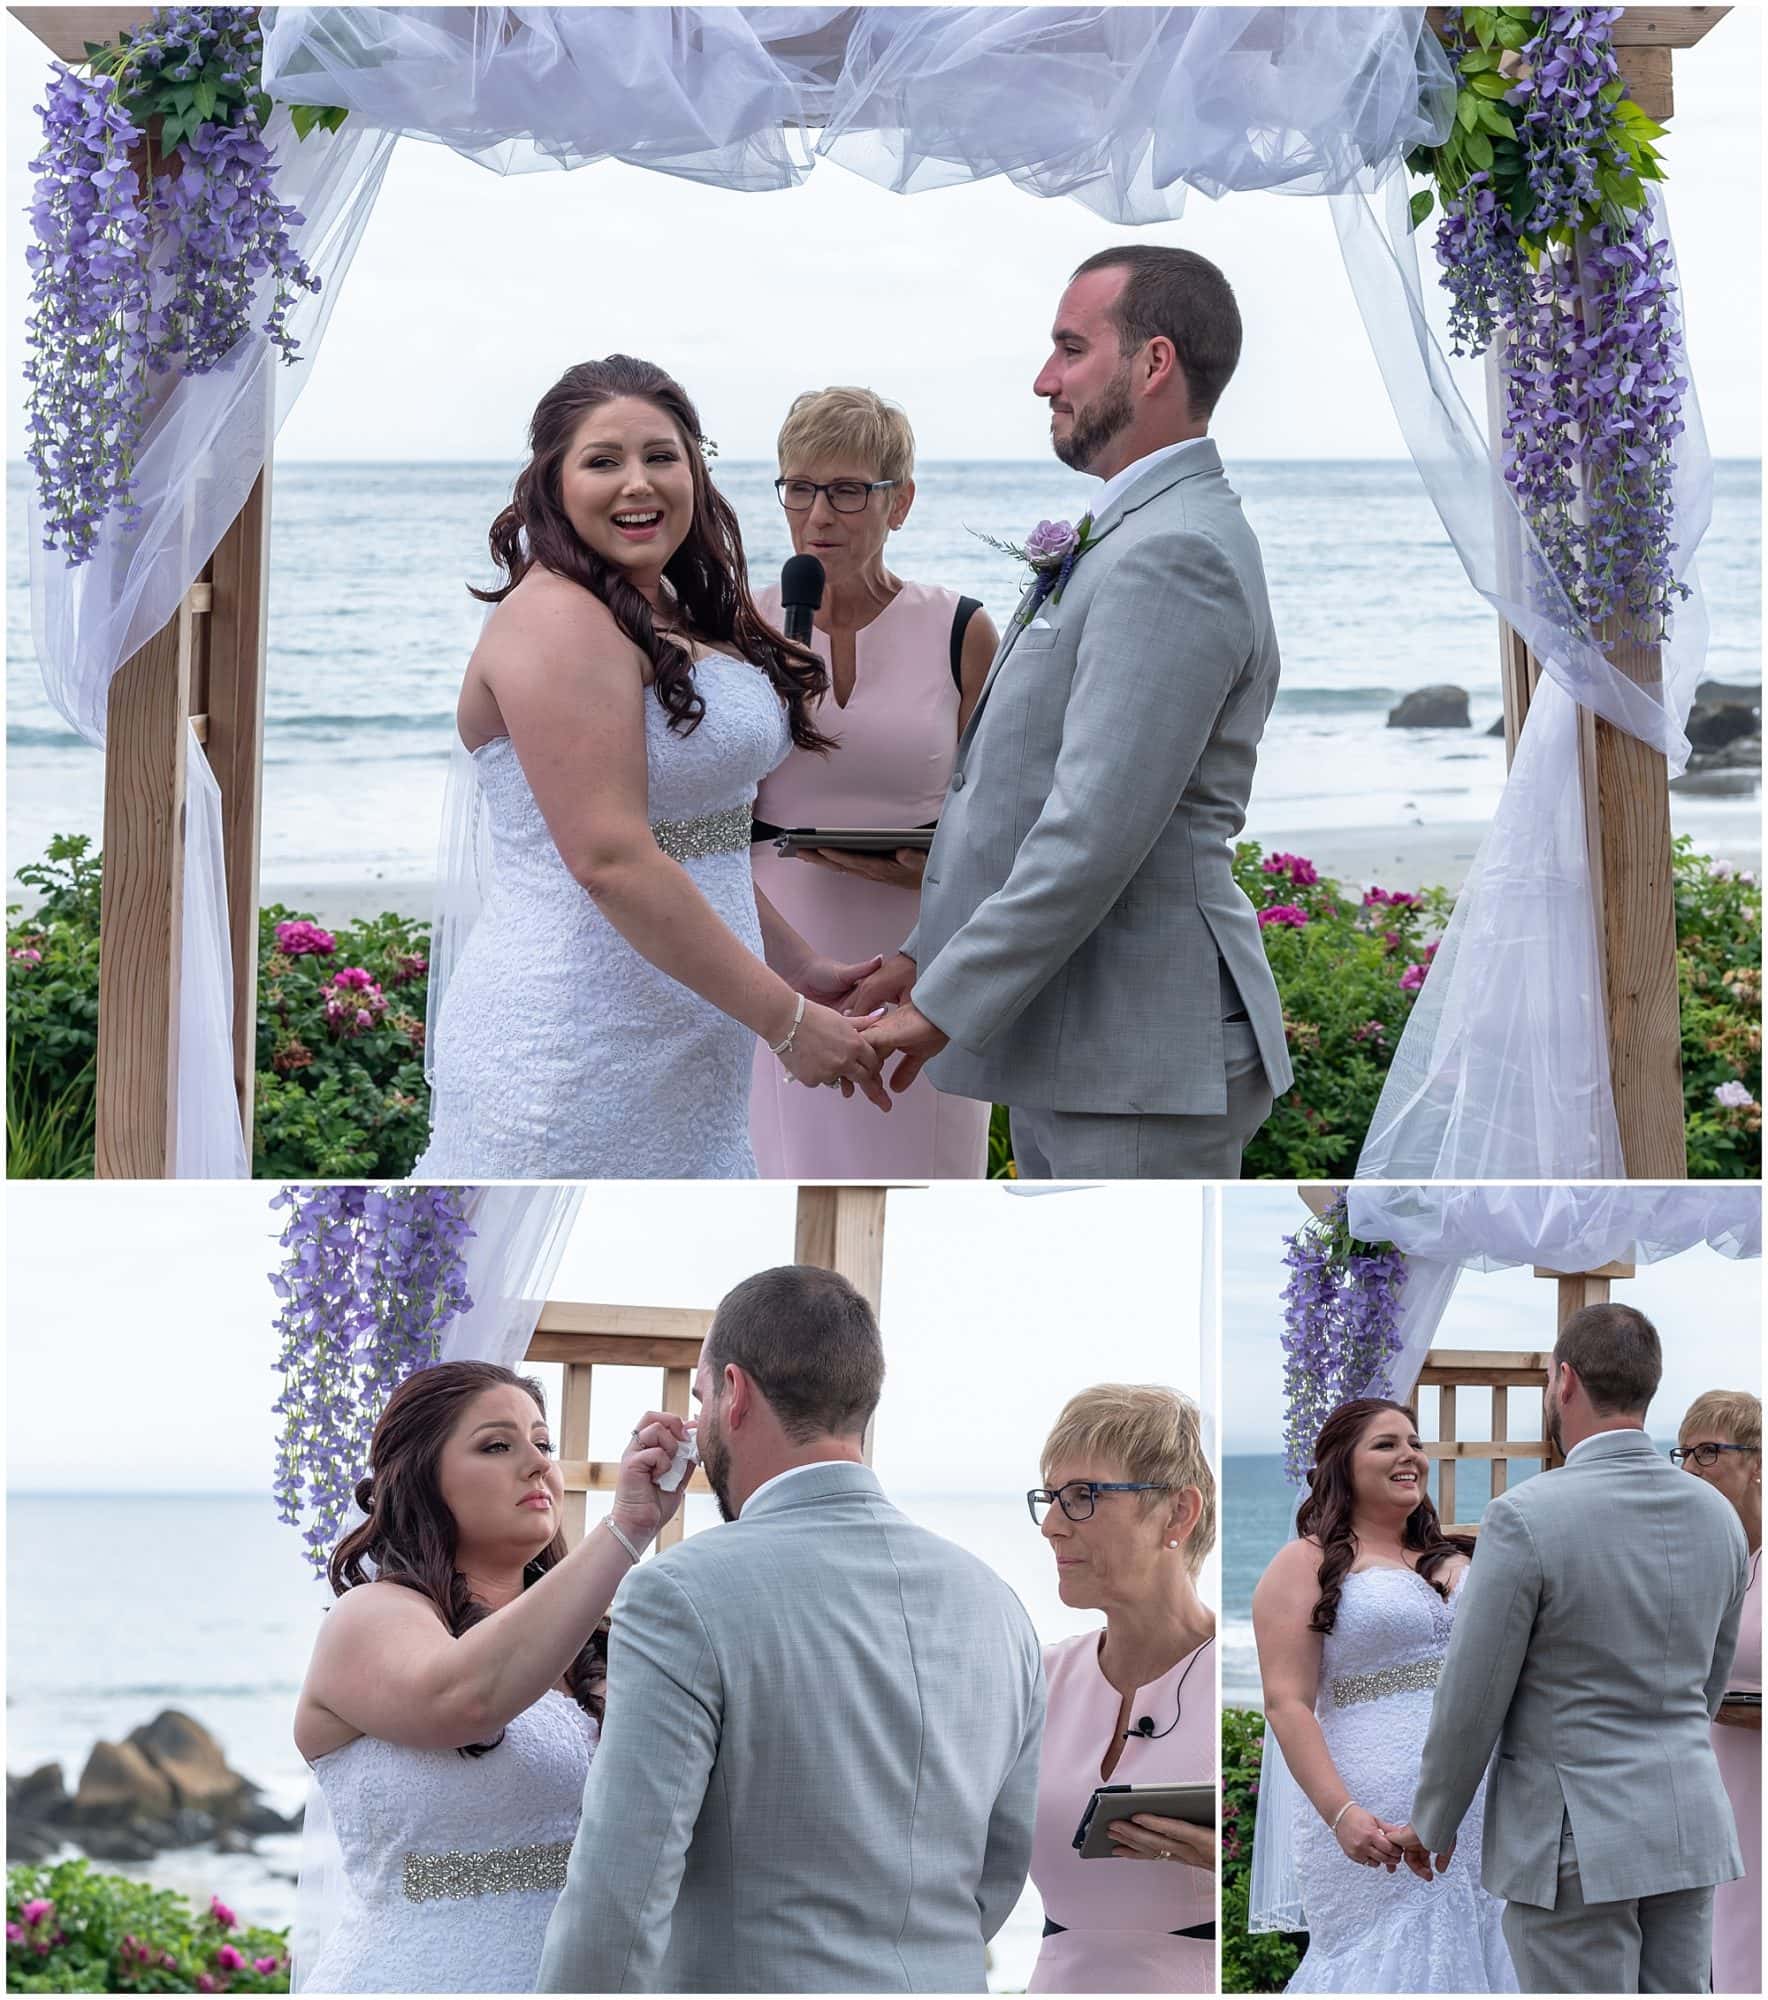 The bride and groom say their wedding vows to each other during their wedding ceremony at the White Point Beach Resort in Halifax NS.